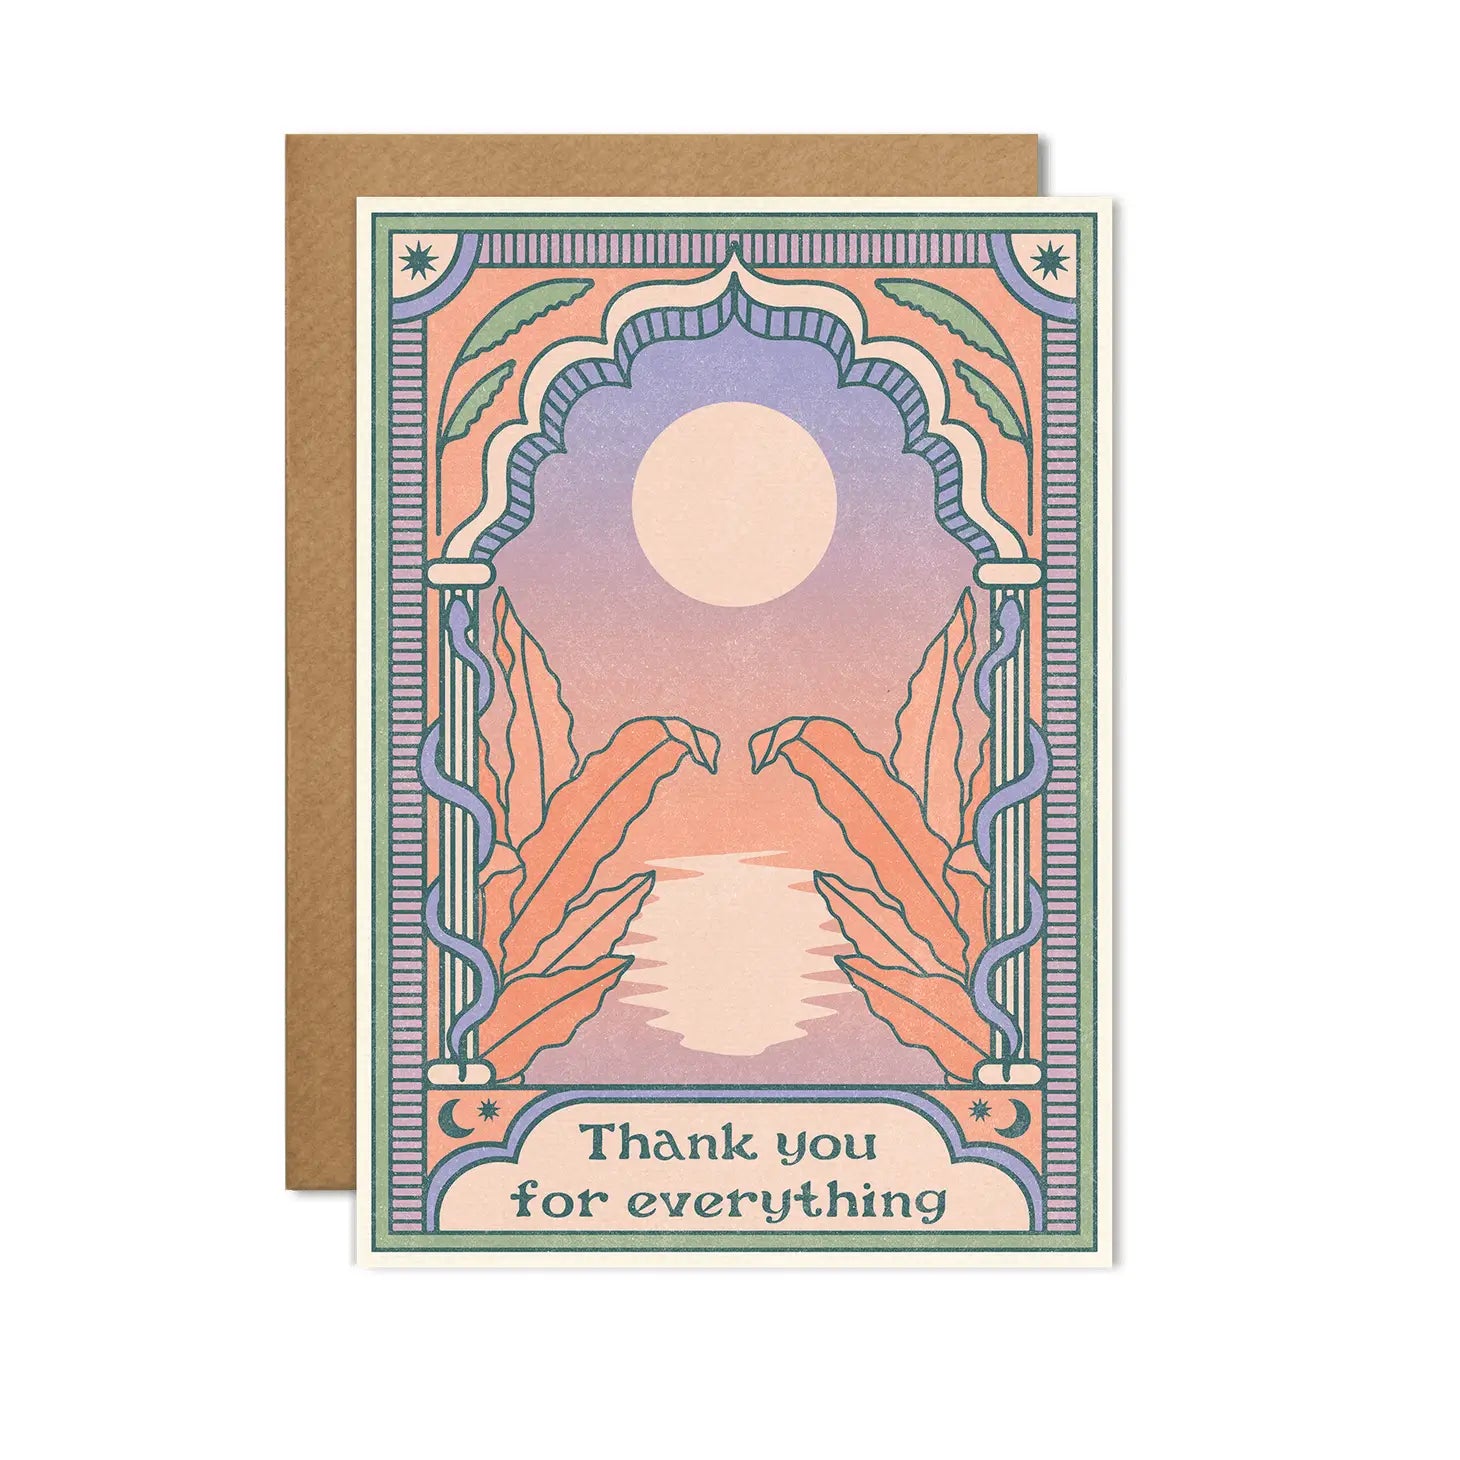 The Thank You For Everything Sunrise Card